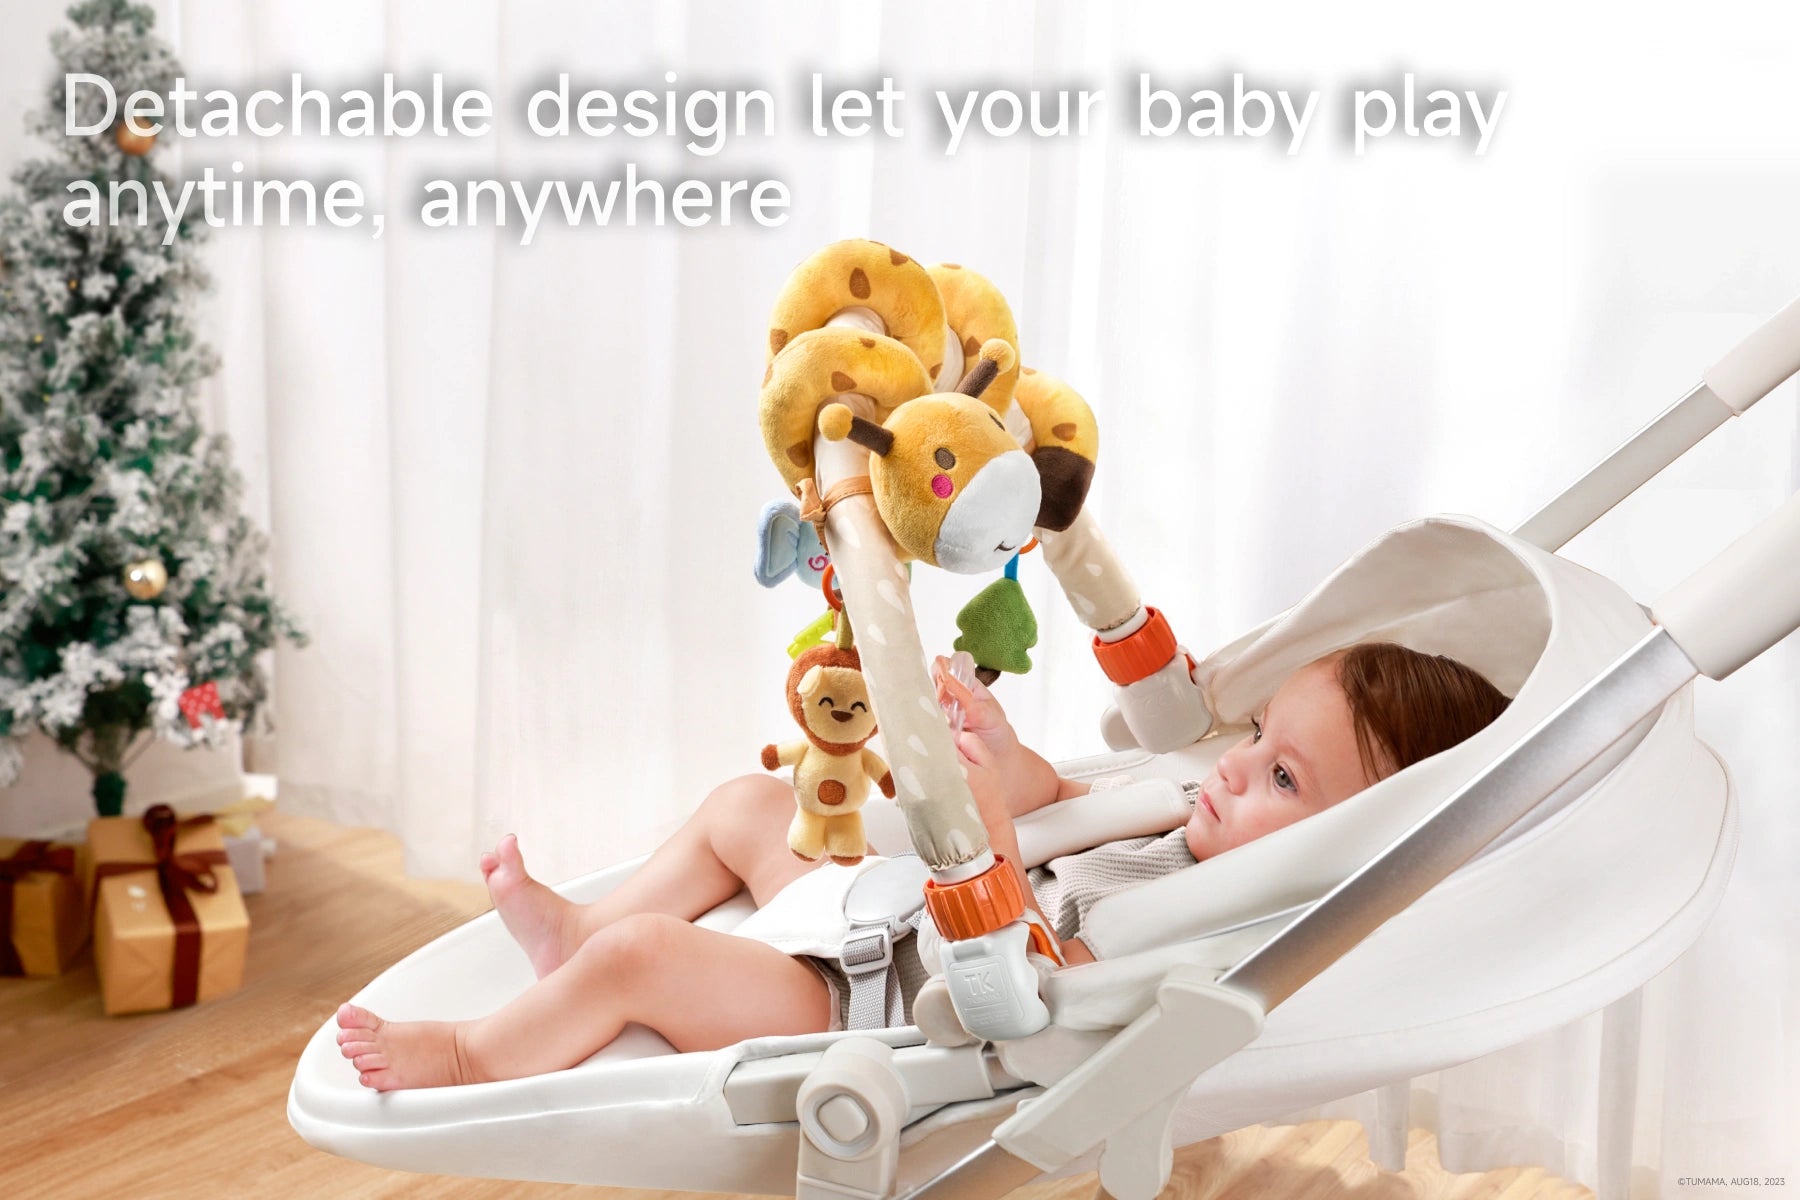 Baby stroller arch toy with adorable giraffe elephant lion characters